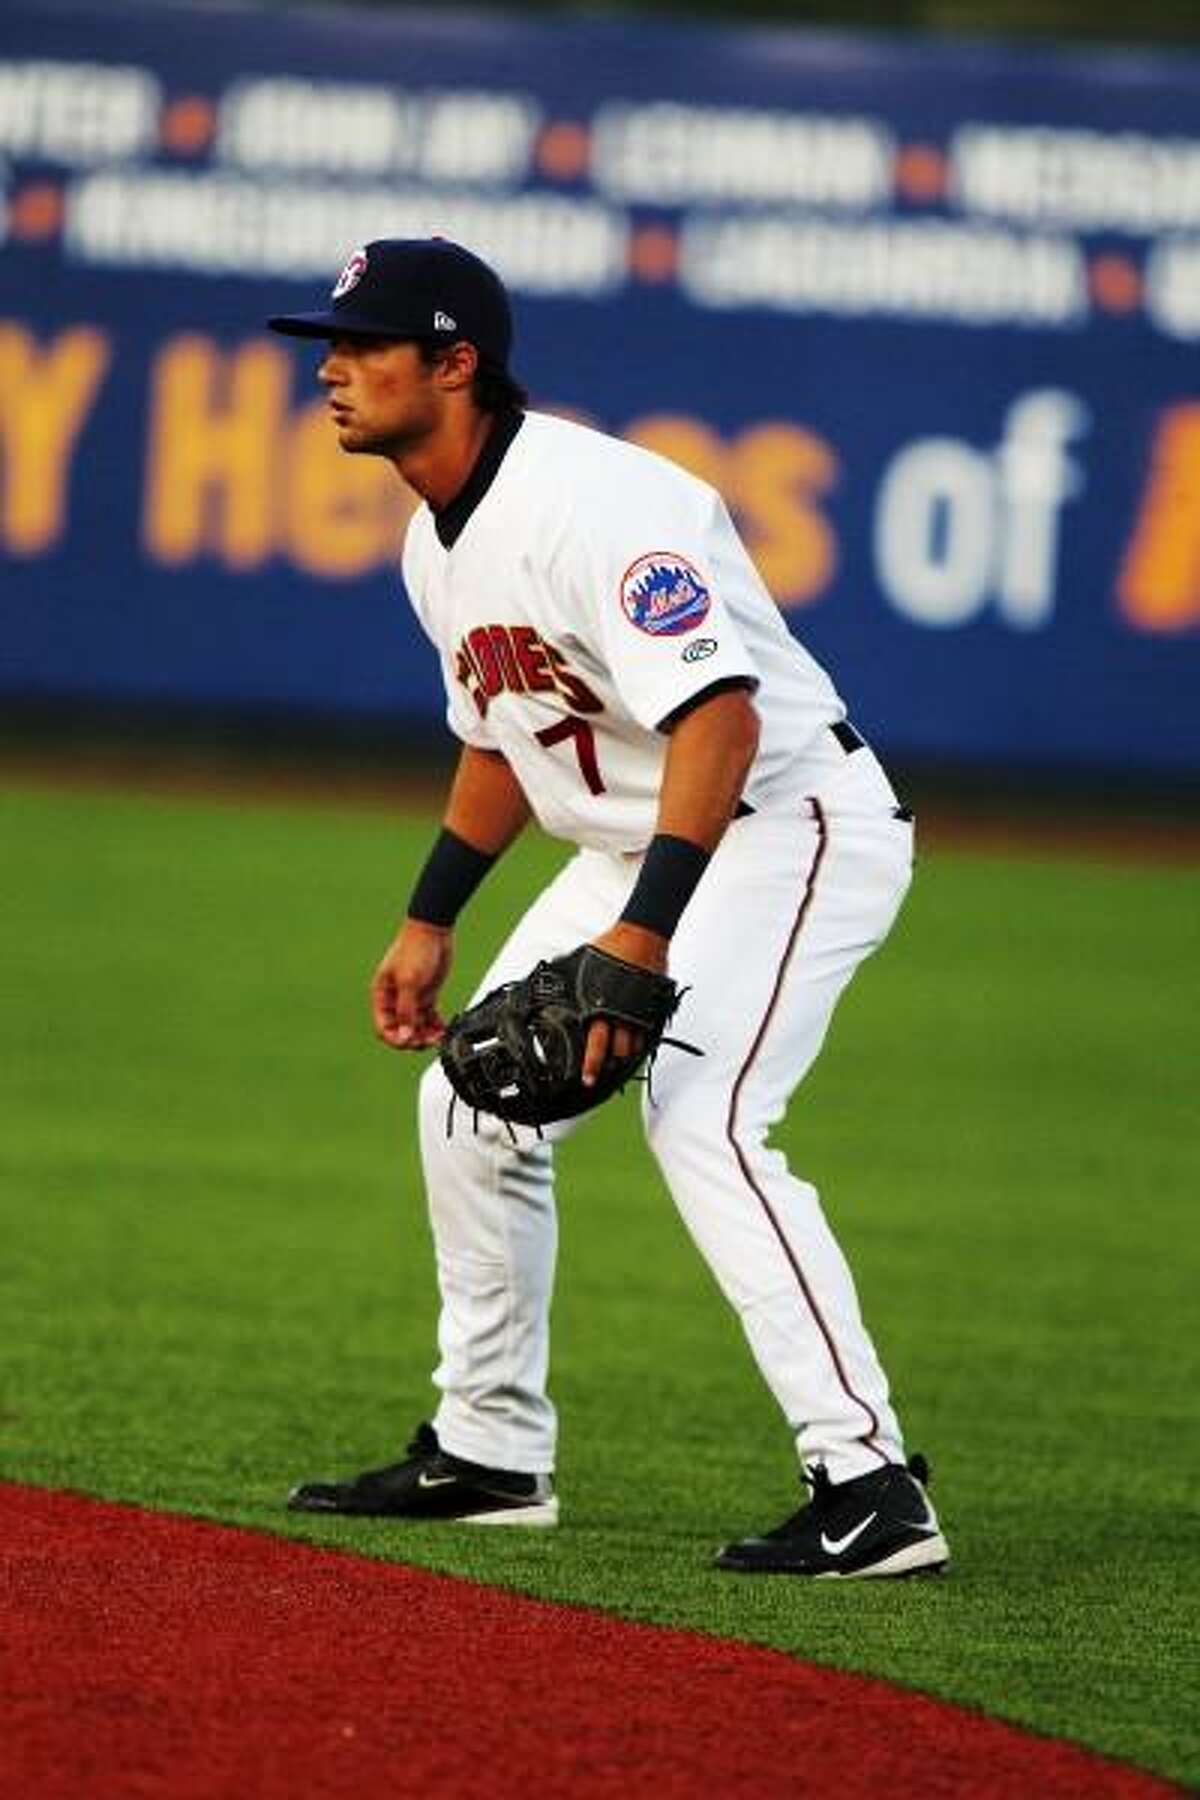 MINOR LEAGUE BASEBALL: Former UConn star L.J. Mazzilli making his own name  in Mets system